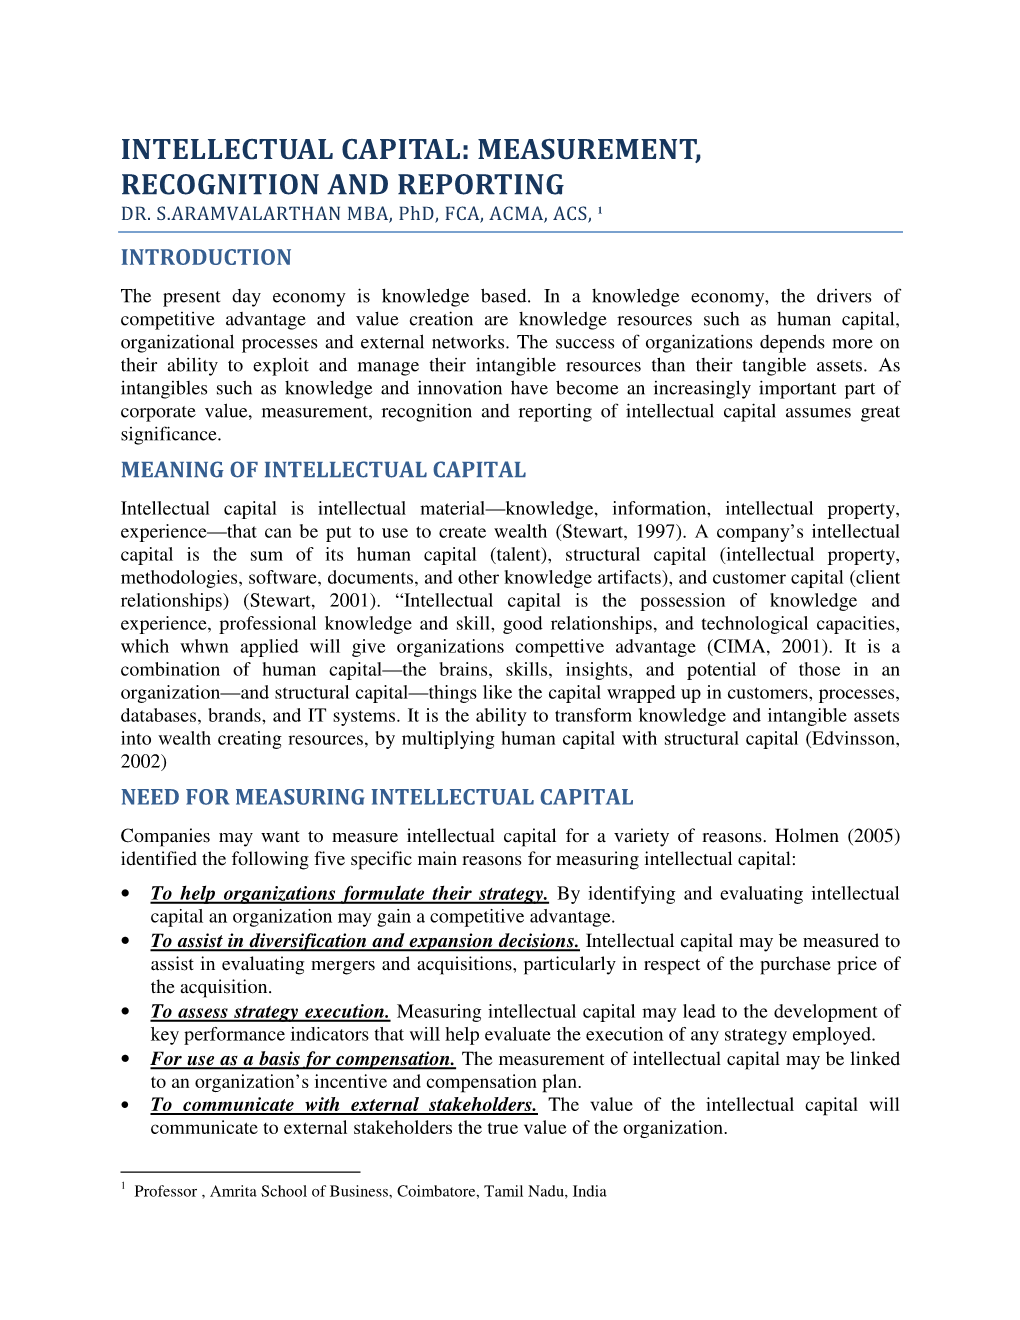 Intellectual Capital: Measurement, Recognition and Reporting Dr